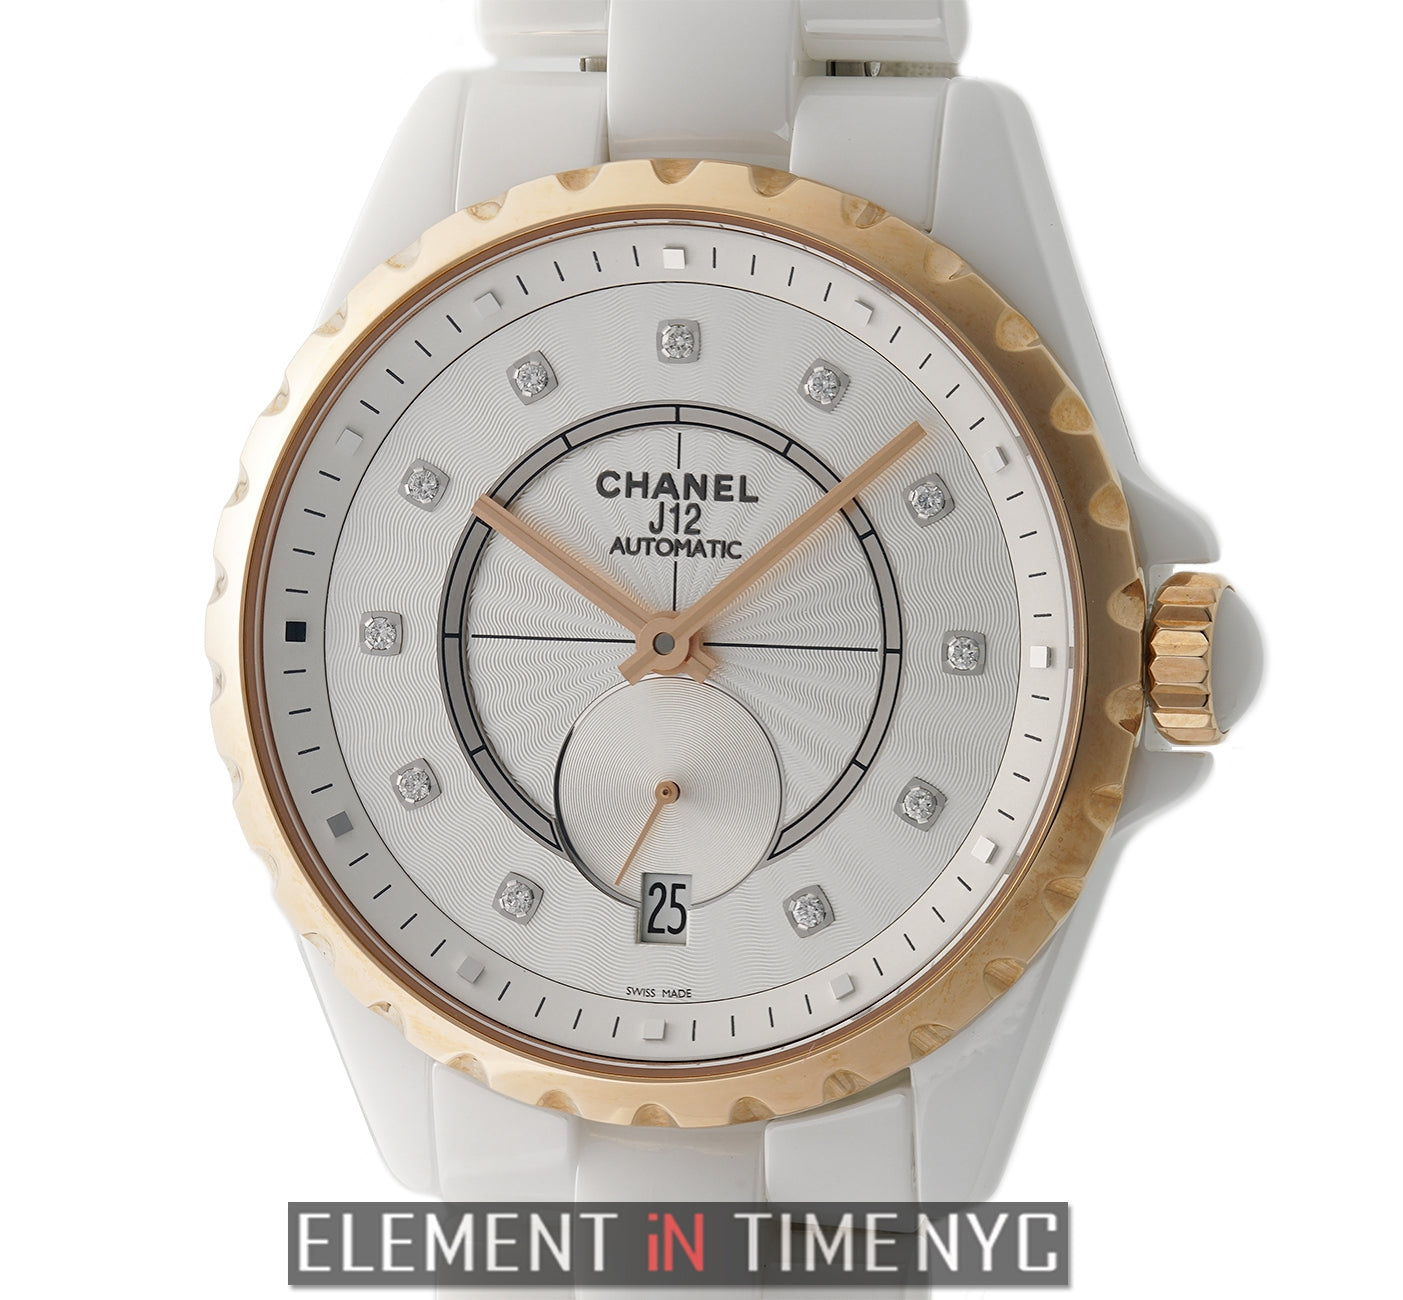 chanel watch gold